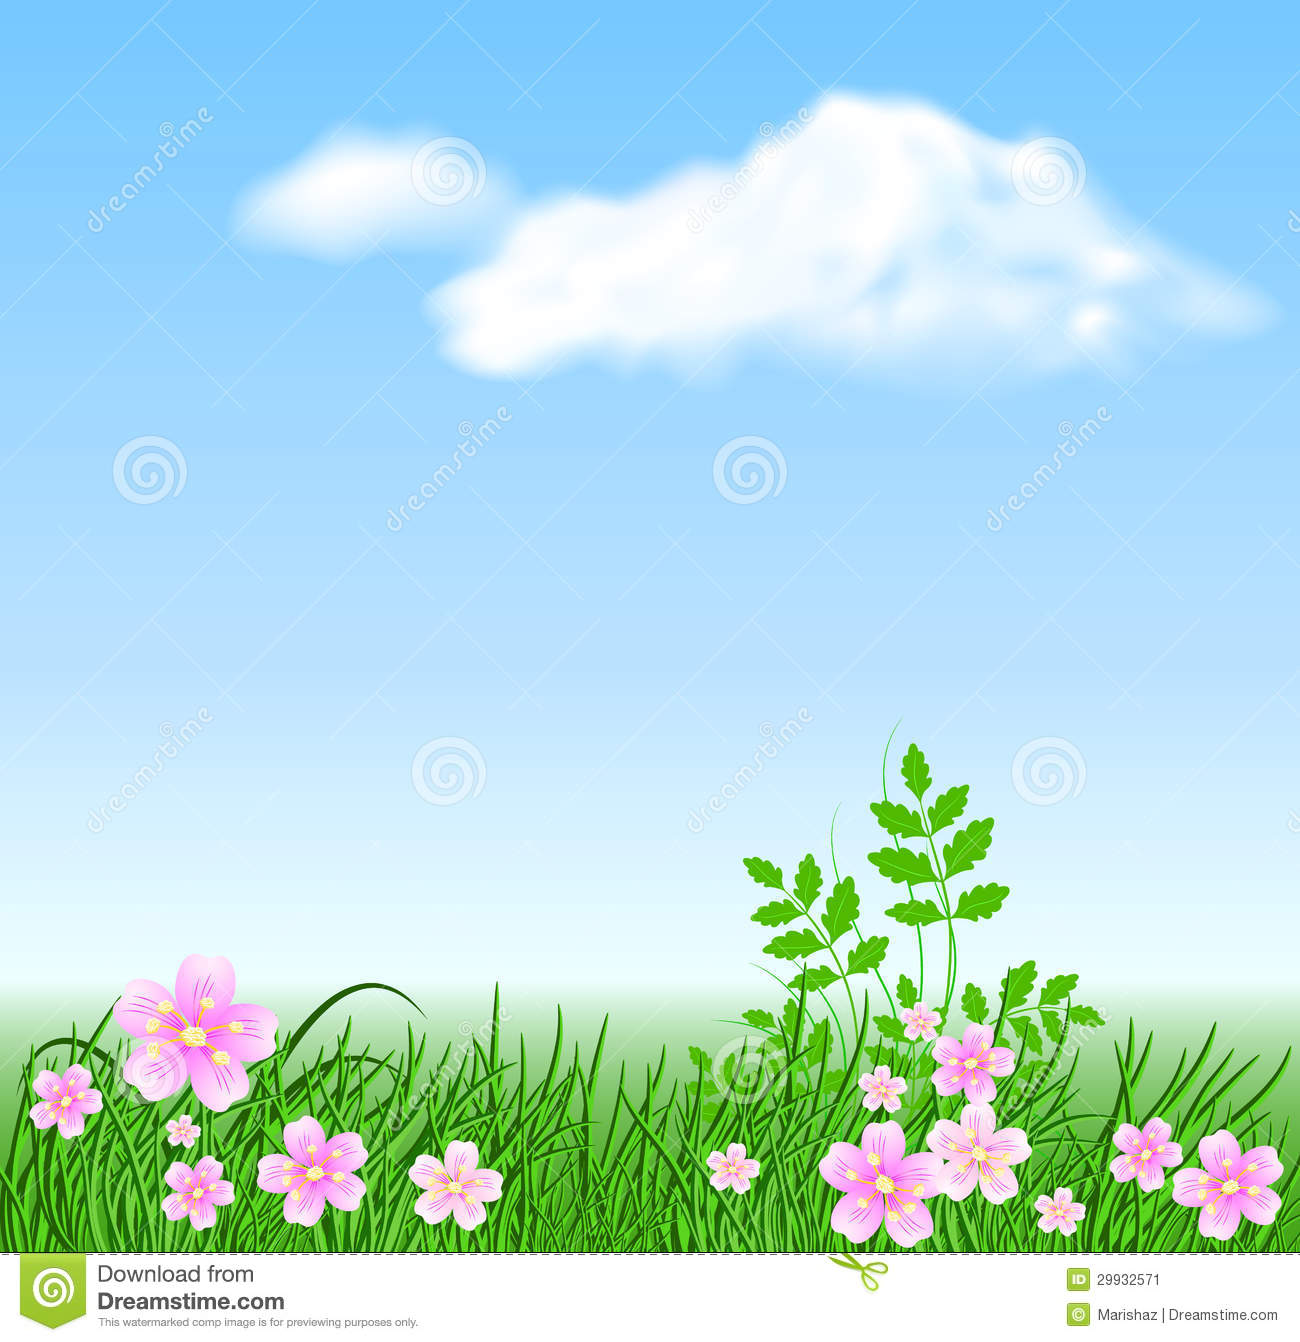 clipart sky background - photo #33